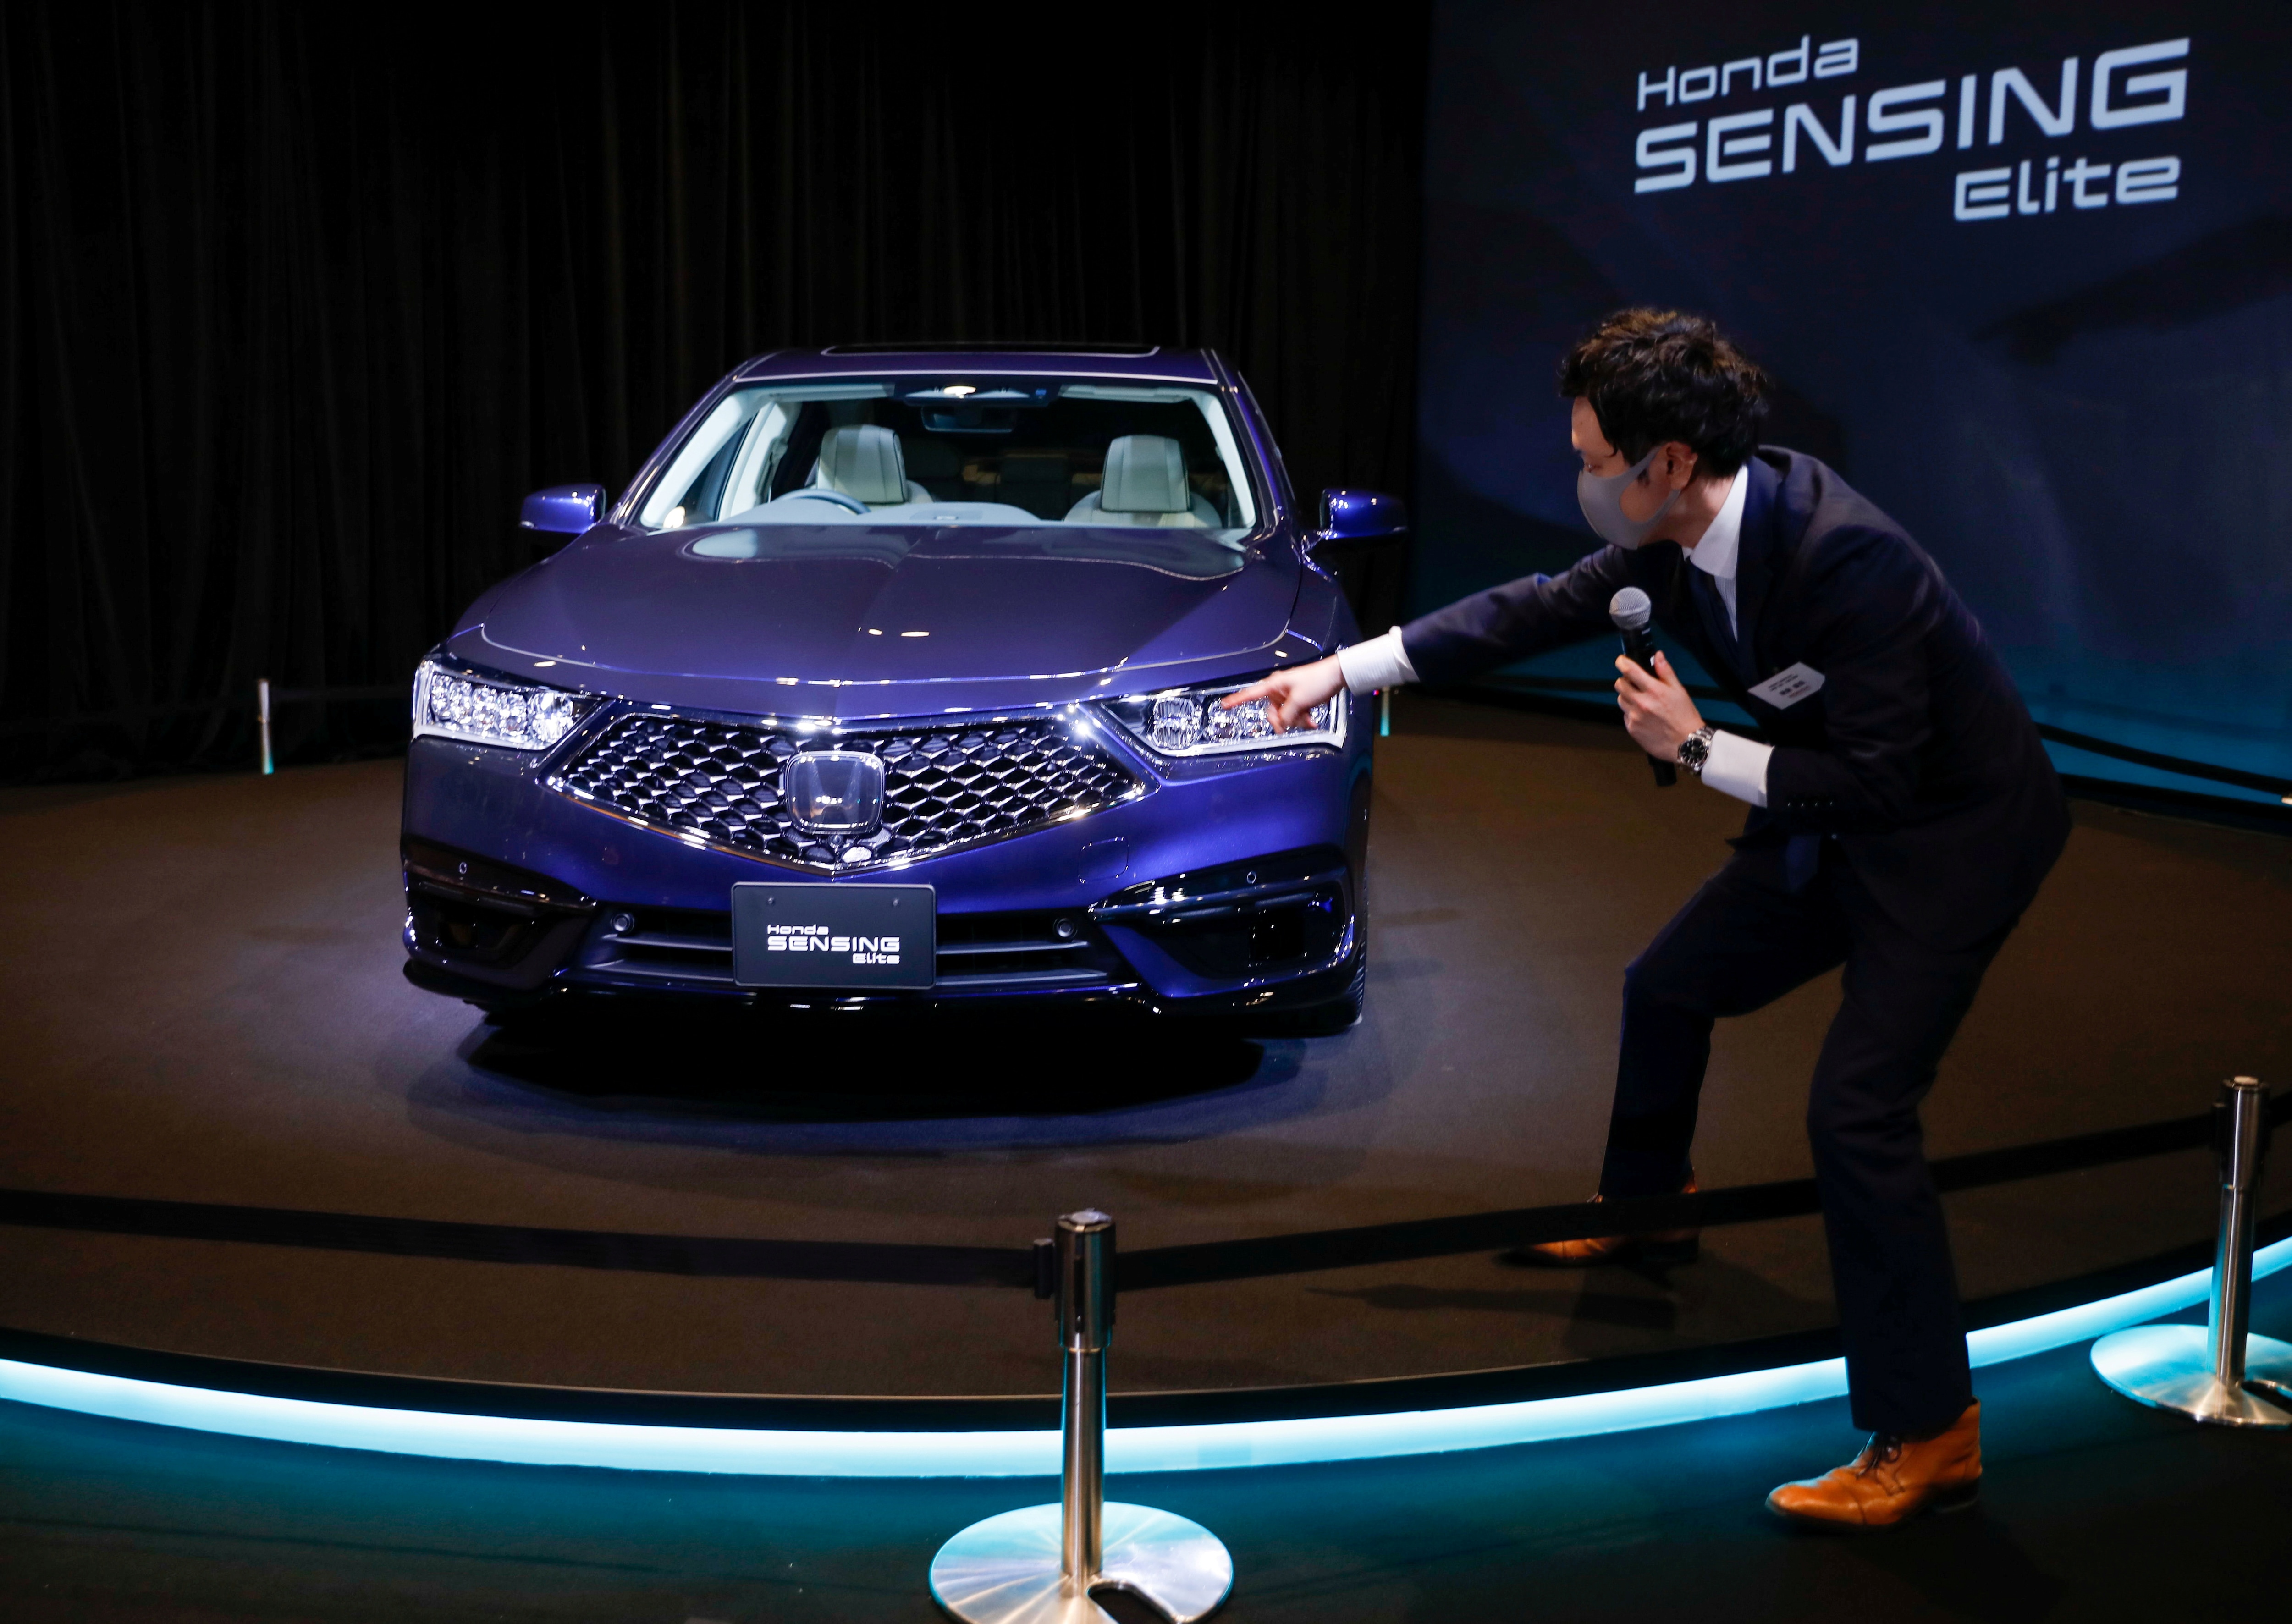 Honda Legend on stage during an unveiling event in Tokyo.